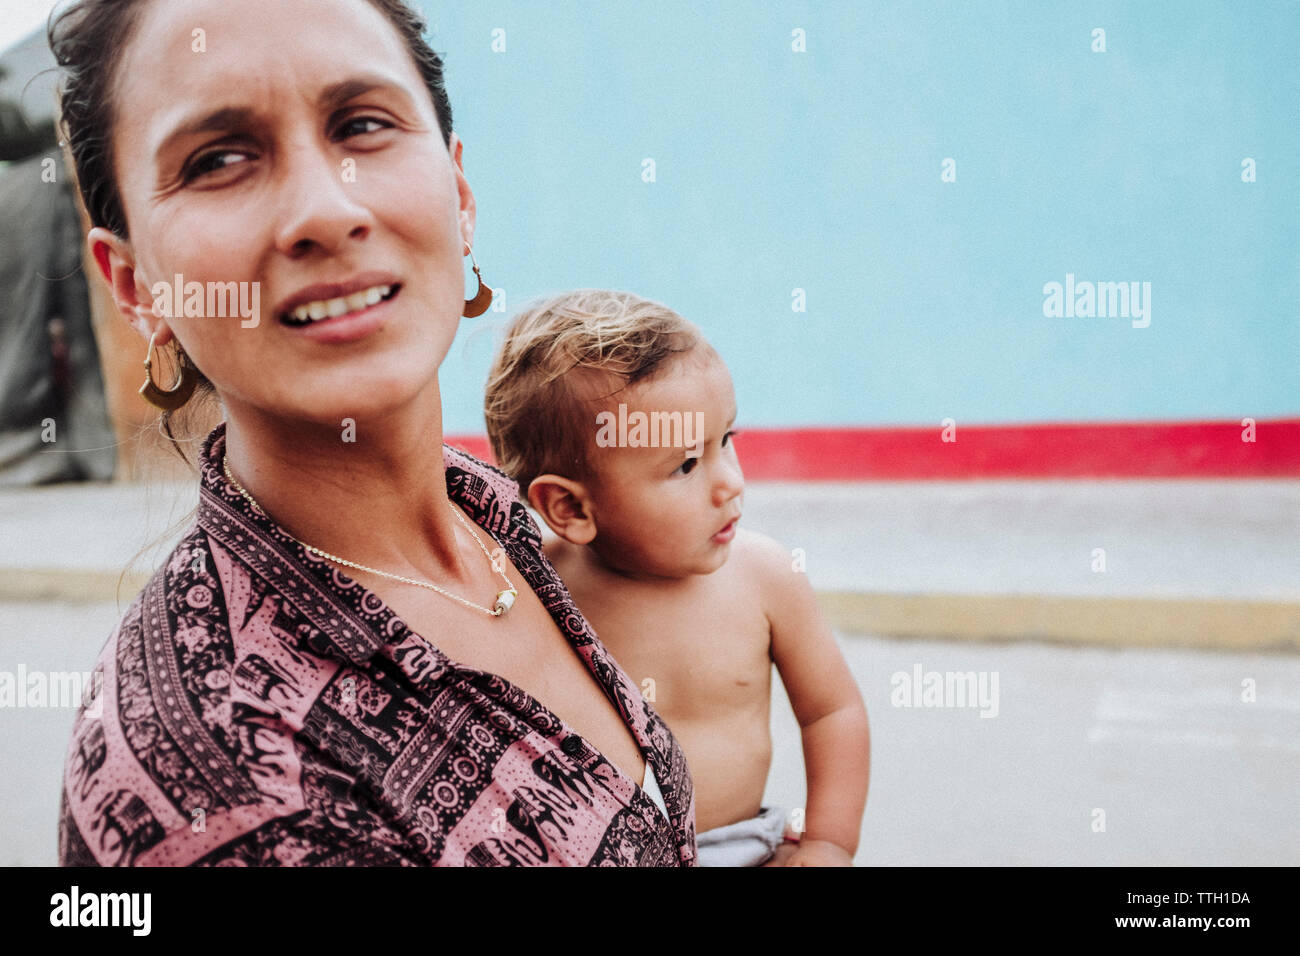 Portrait of a woman holding her baby Banque D'Images